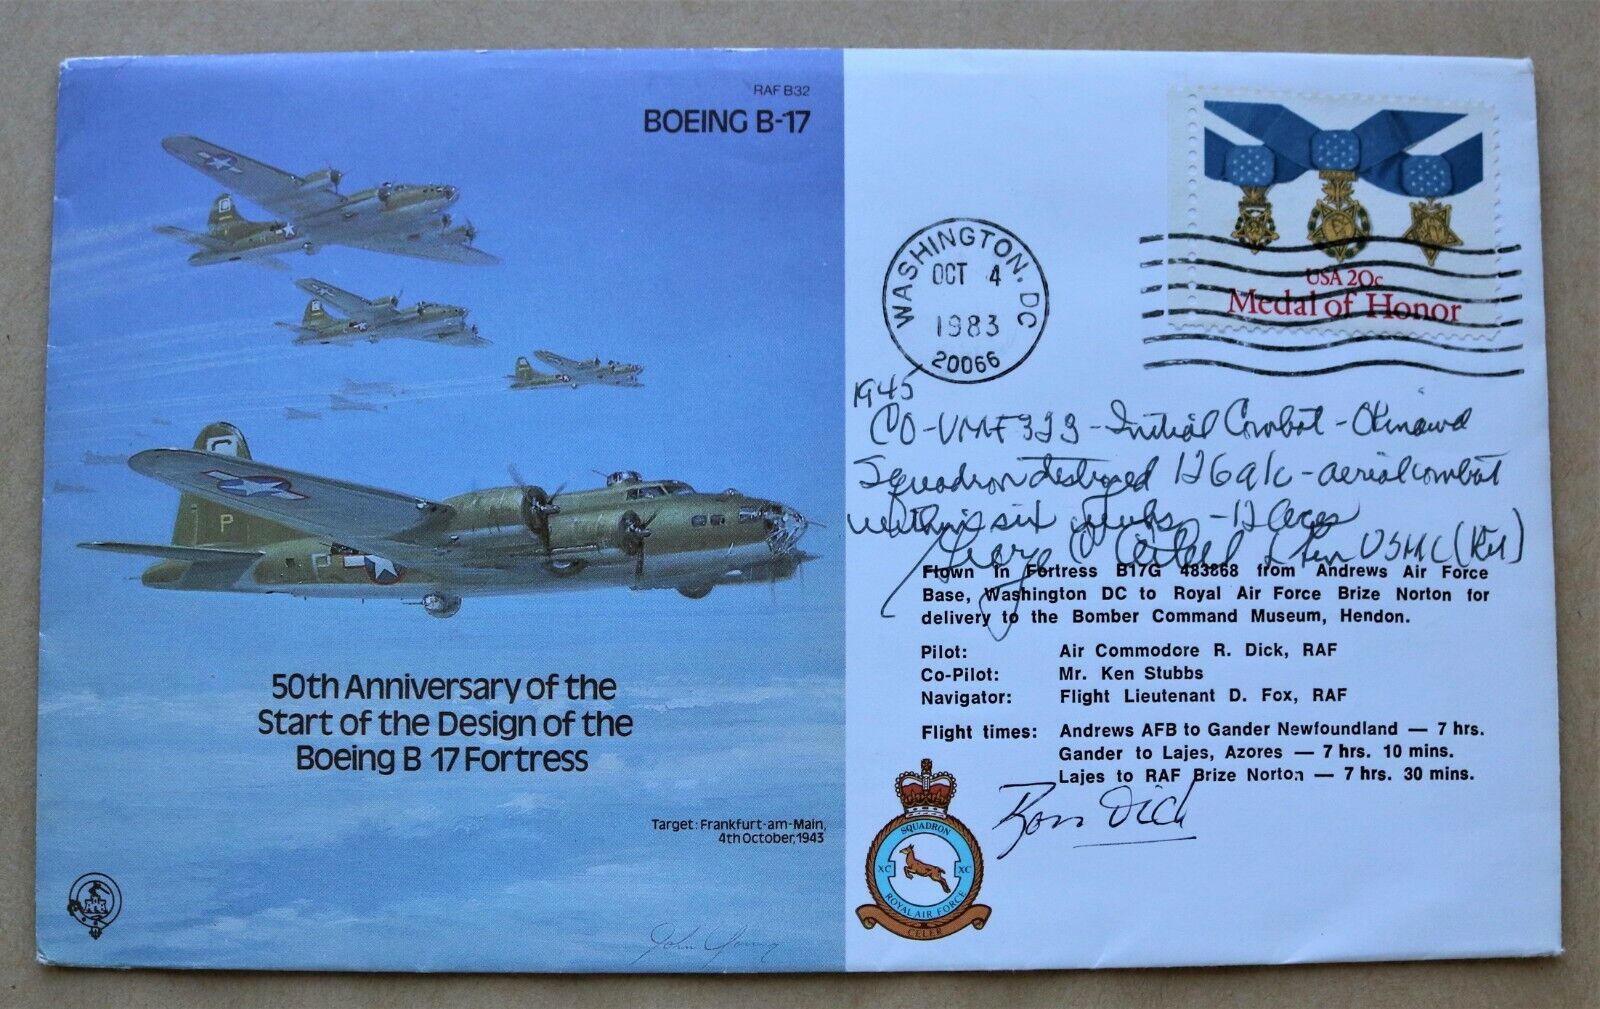 BOEING 日本最大のブランド B 17 FORTRESS 安全Shopping 1983 COVER AXTELL SIGNED GENERAL Lt GEORGE CLIFTON